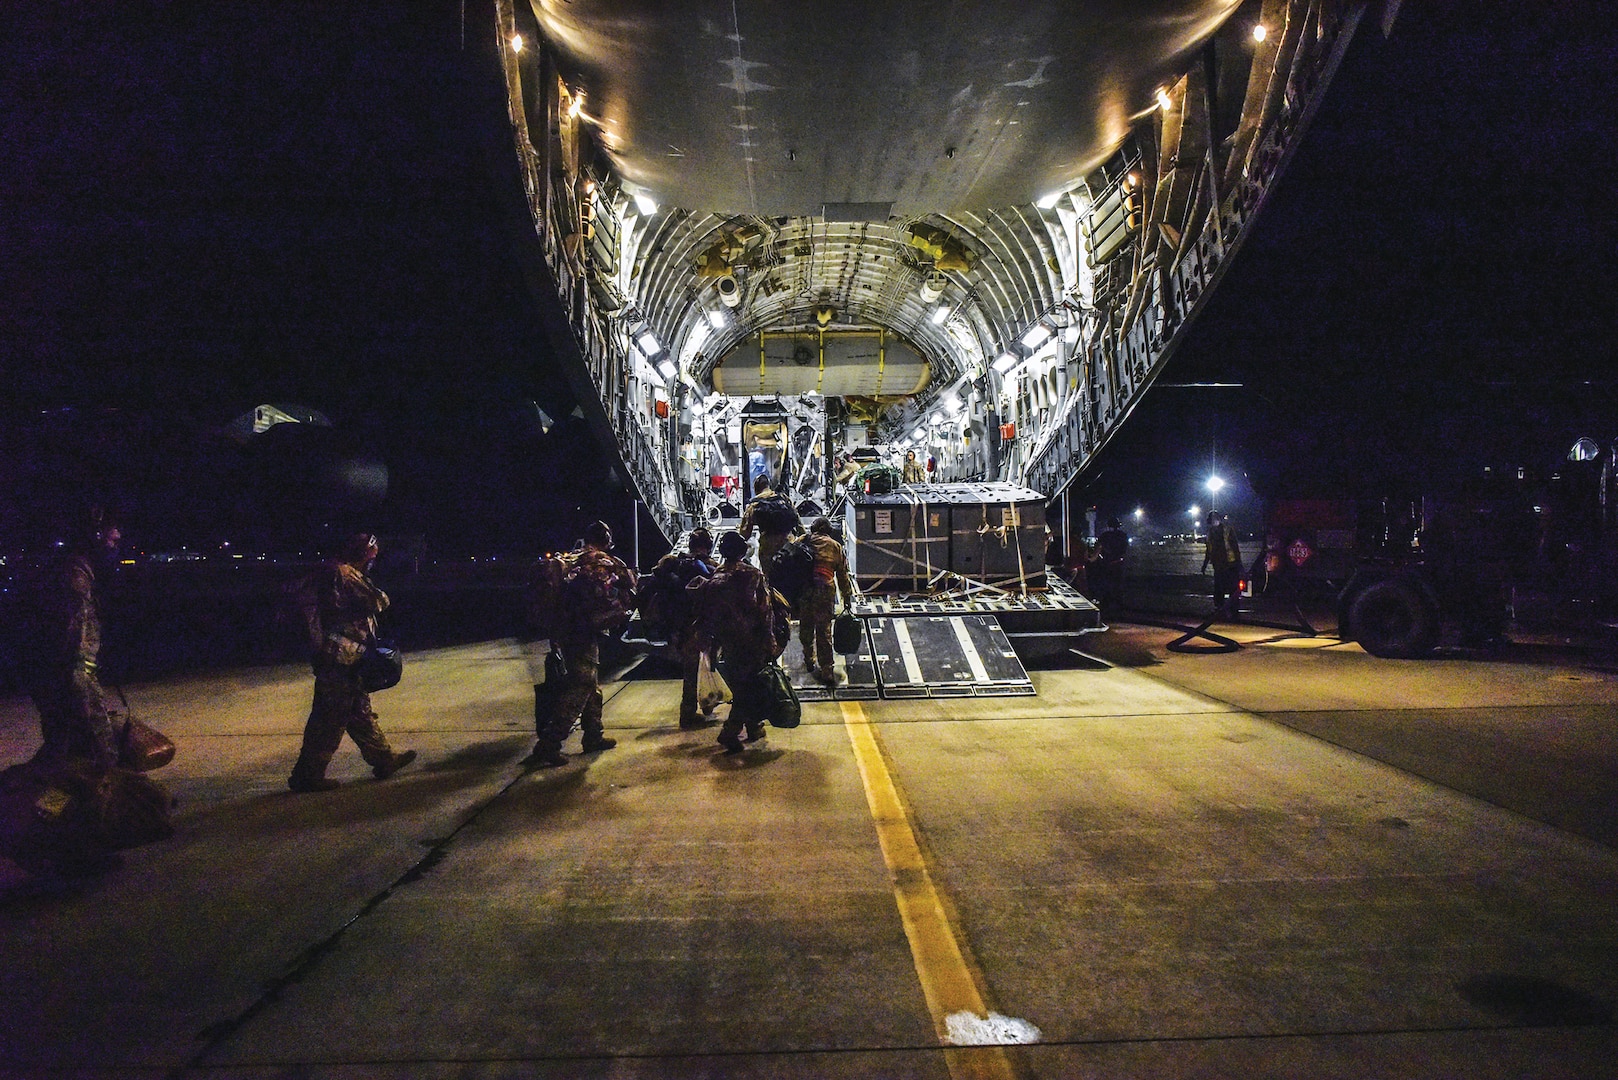 Airmen deployed a Transport Isolation System for the first time in the Indo-Pacific to safely transport a COVID-19 patient. (U.S. Indo-Pacific Command, July 17, 2020)